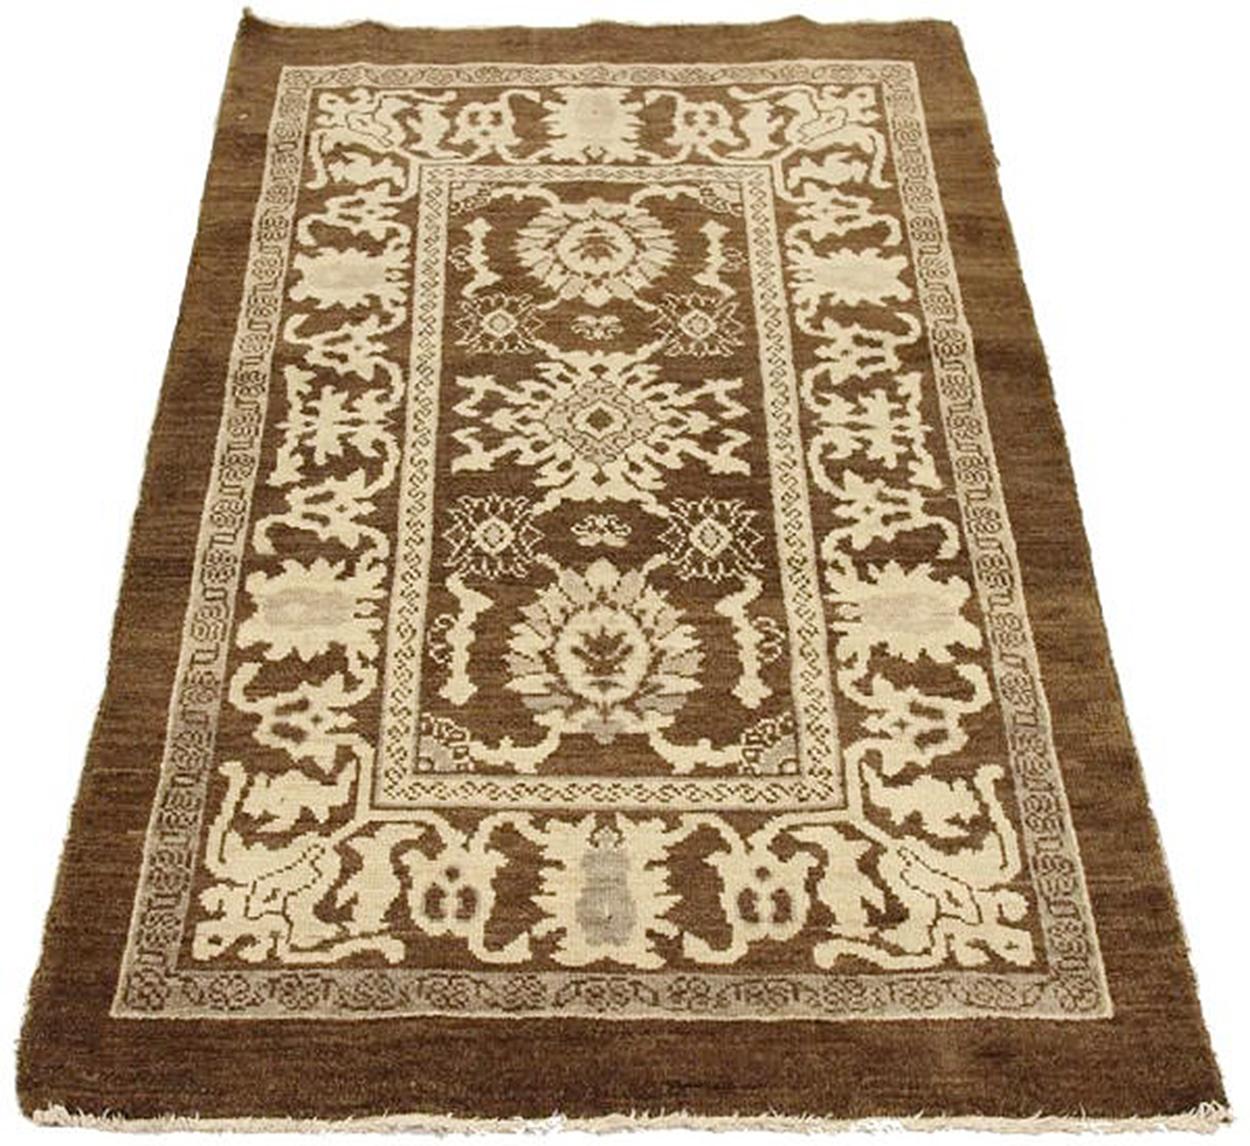 New handmade Persian area rug 11520 crafted from high-quality sheep’s wool and colored with eco-friendly vegetable dyes that are proven safe for humans and pets alike. It’s a Classic Sultanabad design showcasing a brown field with prominent Ivory